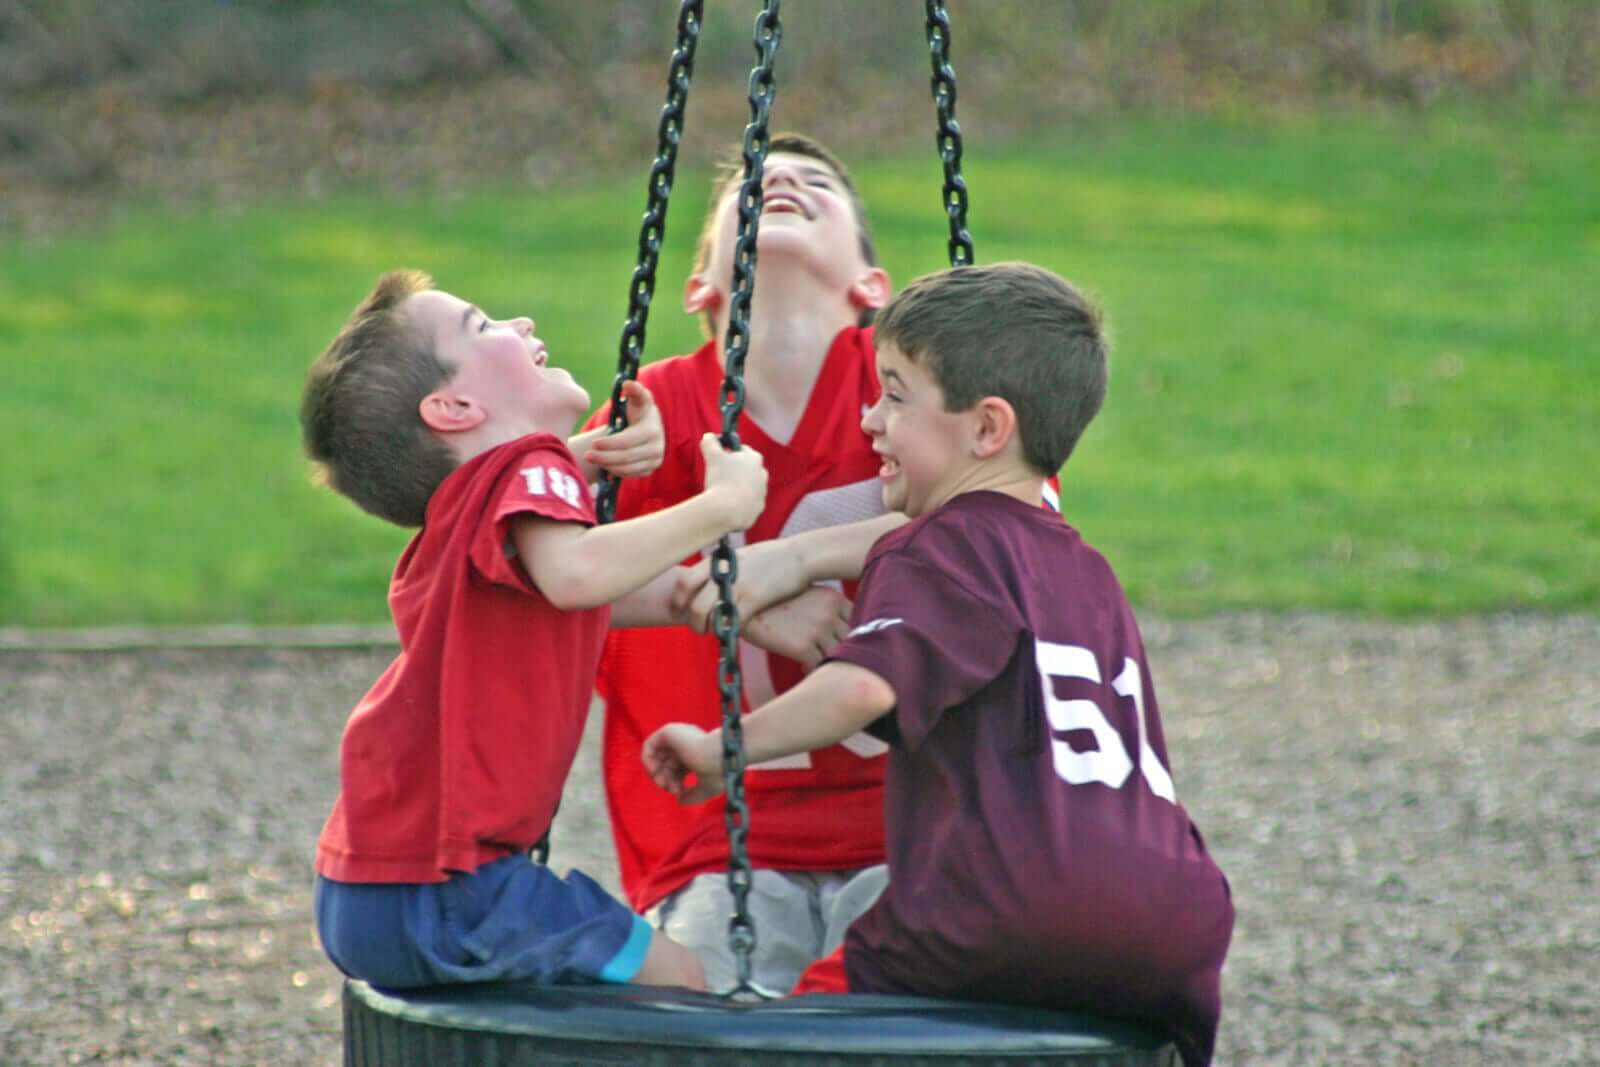 Three boys playing on a tire swing.